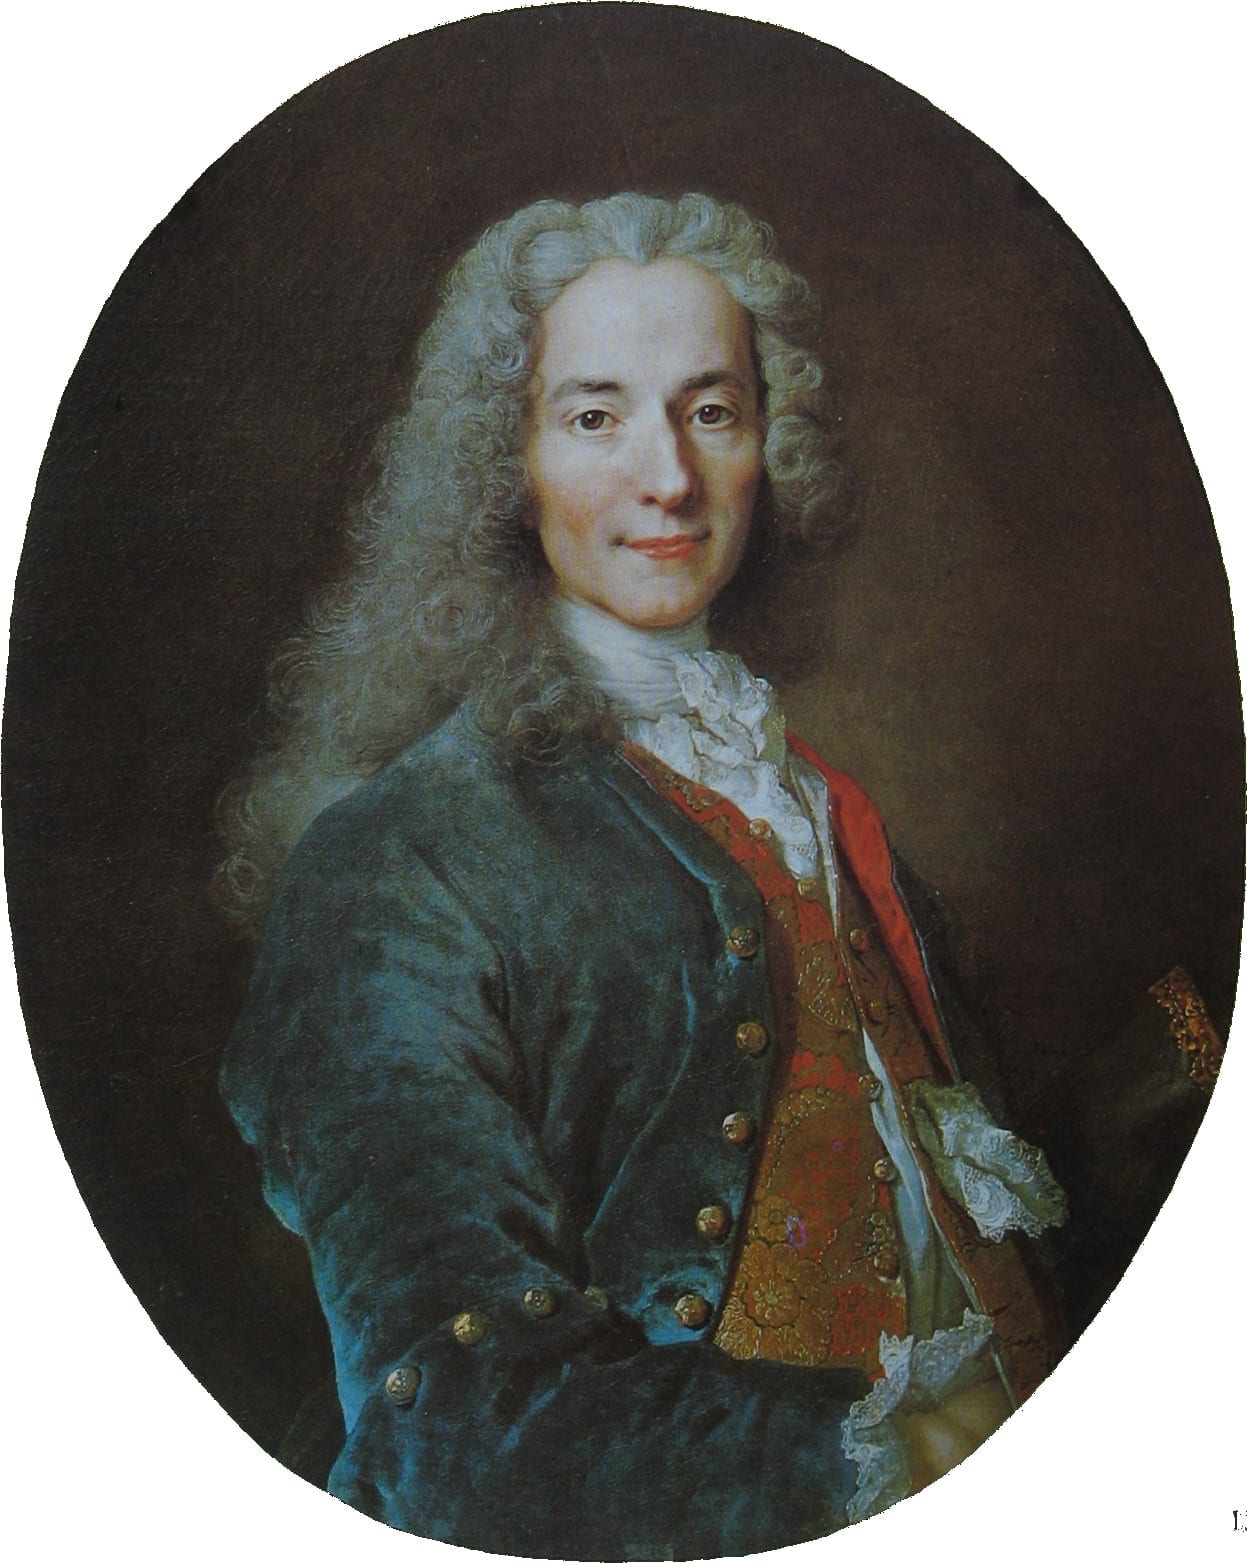 Portrait of Voltaire who wrote on inoculation and data